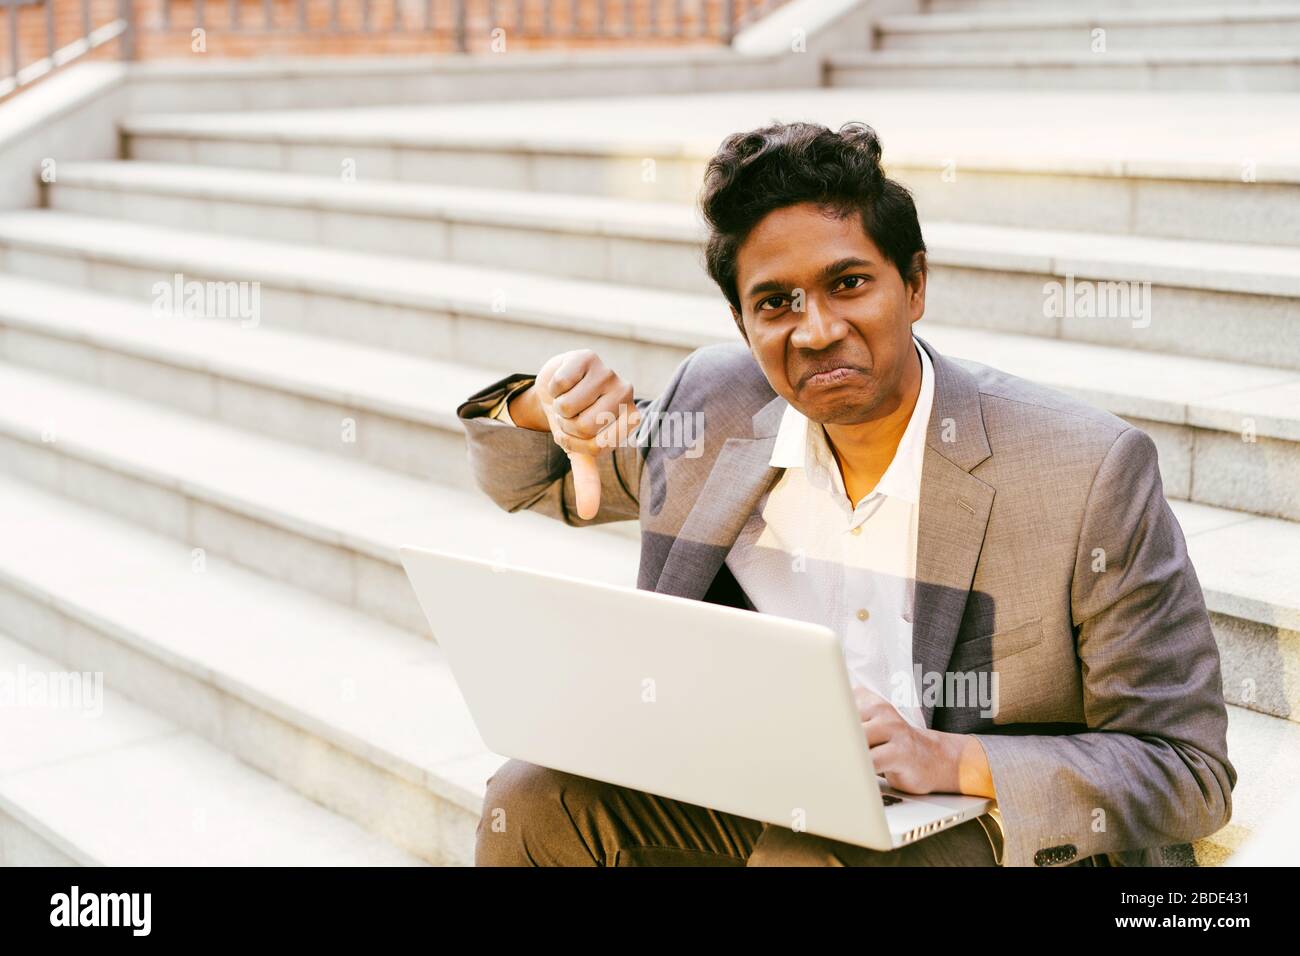 Young handsome Indian man in a white shirt and a business suit is sitting  Stock Photo